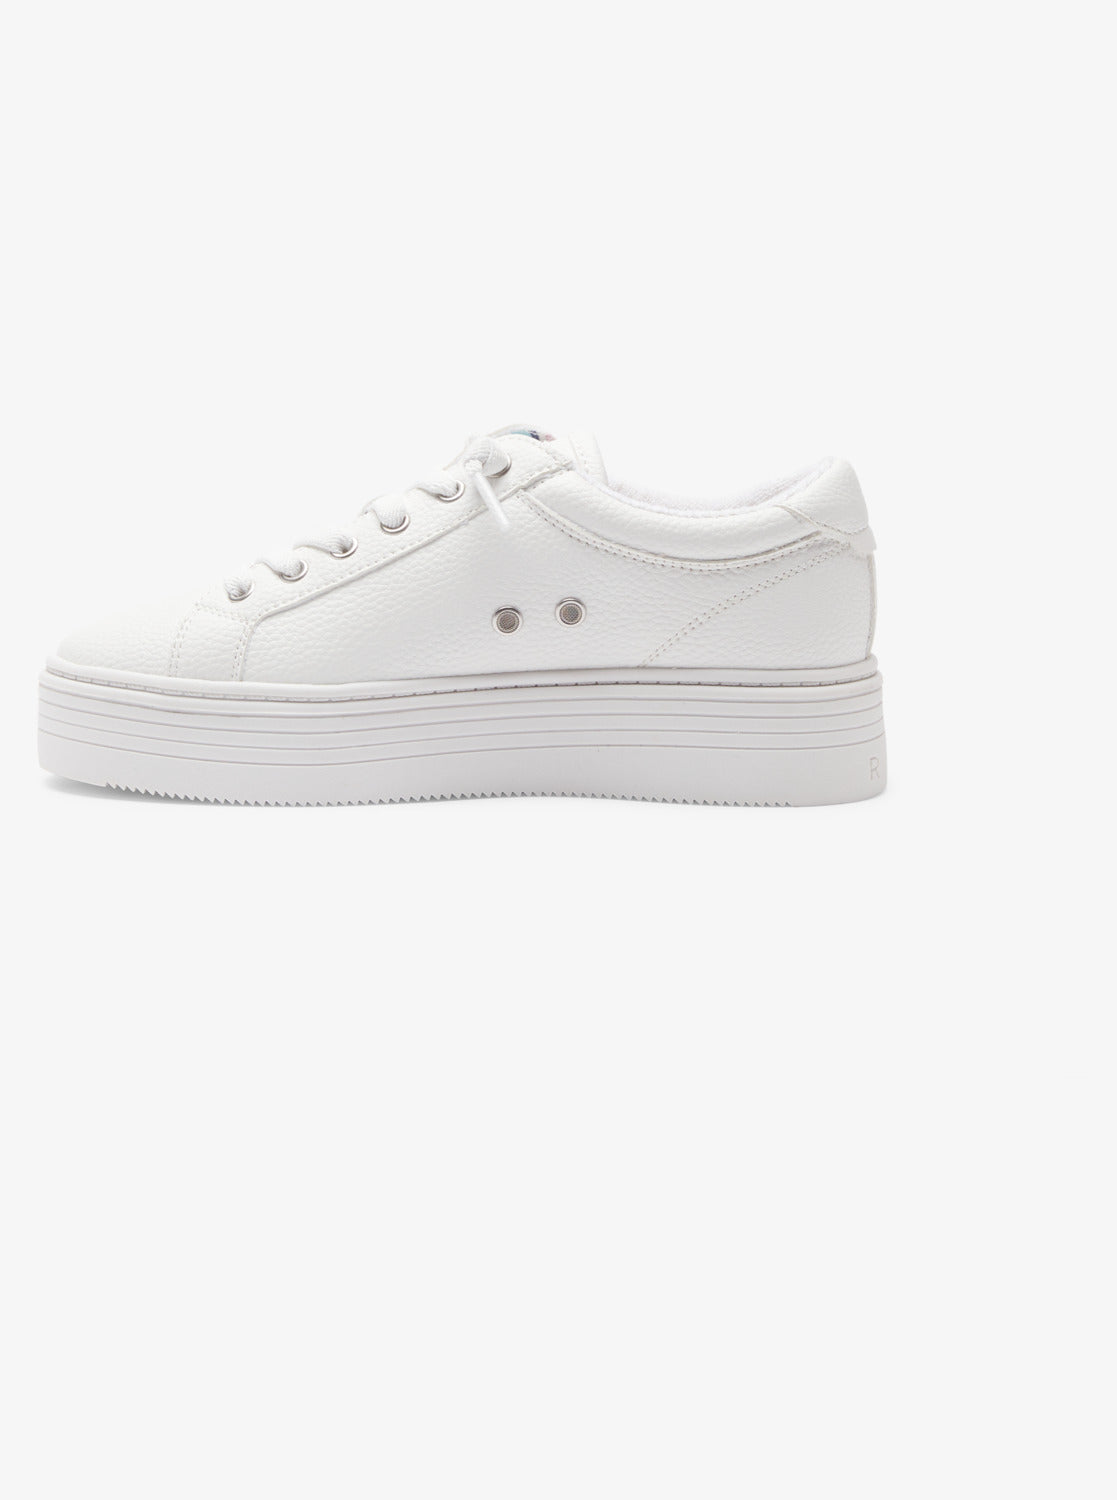 Load image into Gallery viewer, Roxy Sheilahh 2.0 Shoes - White
